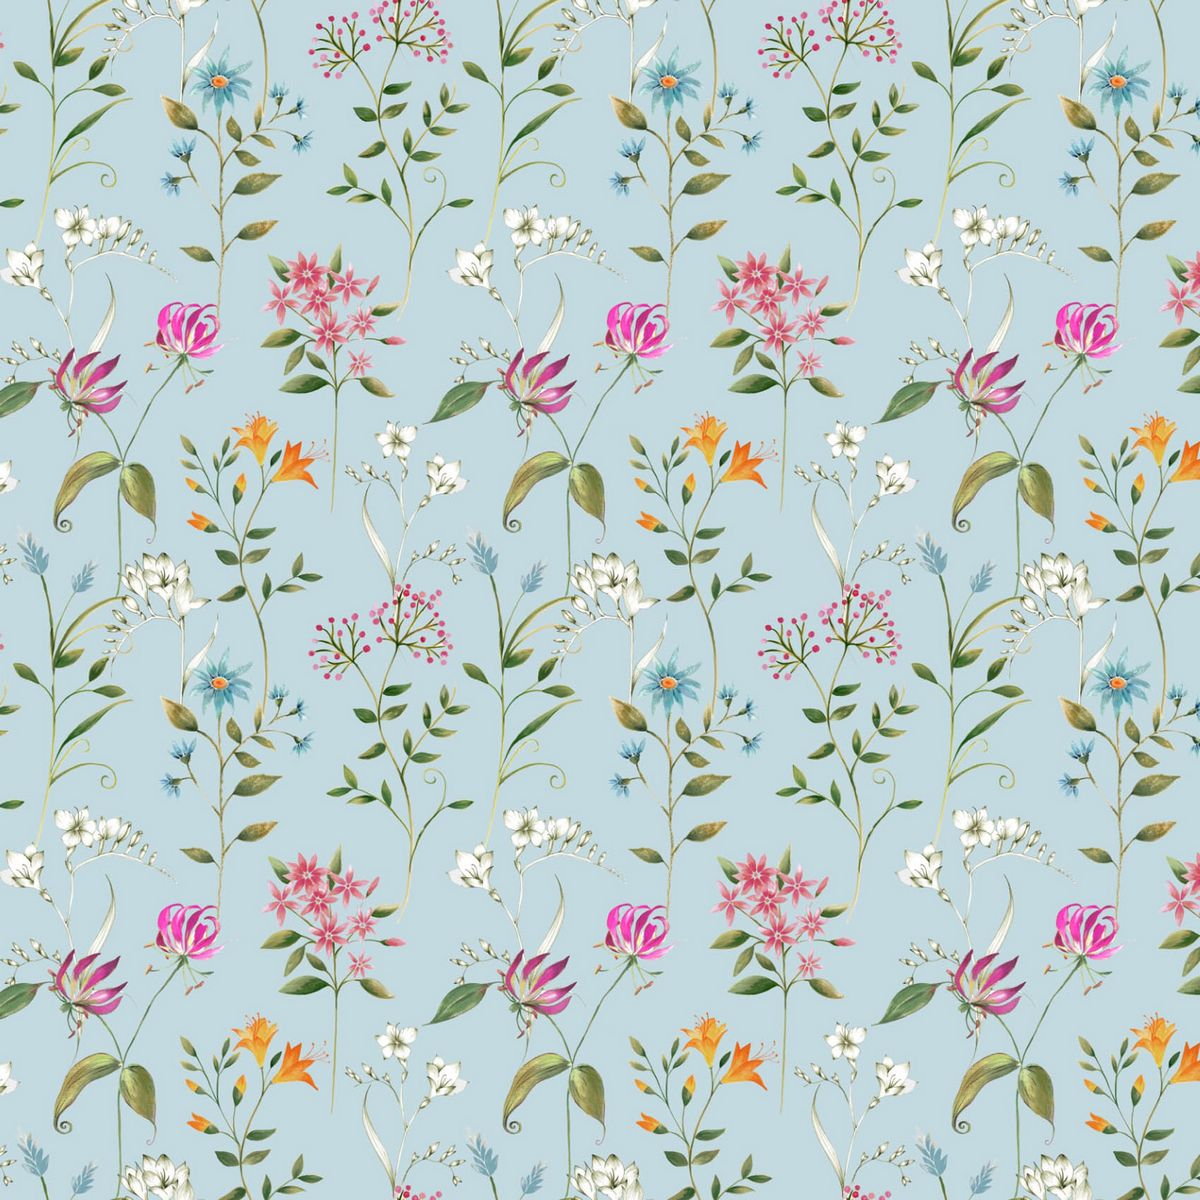 Pemberly Duck Egg Fabric by Voyage Maison